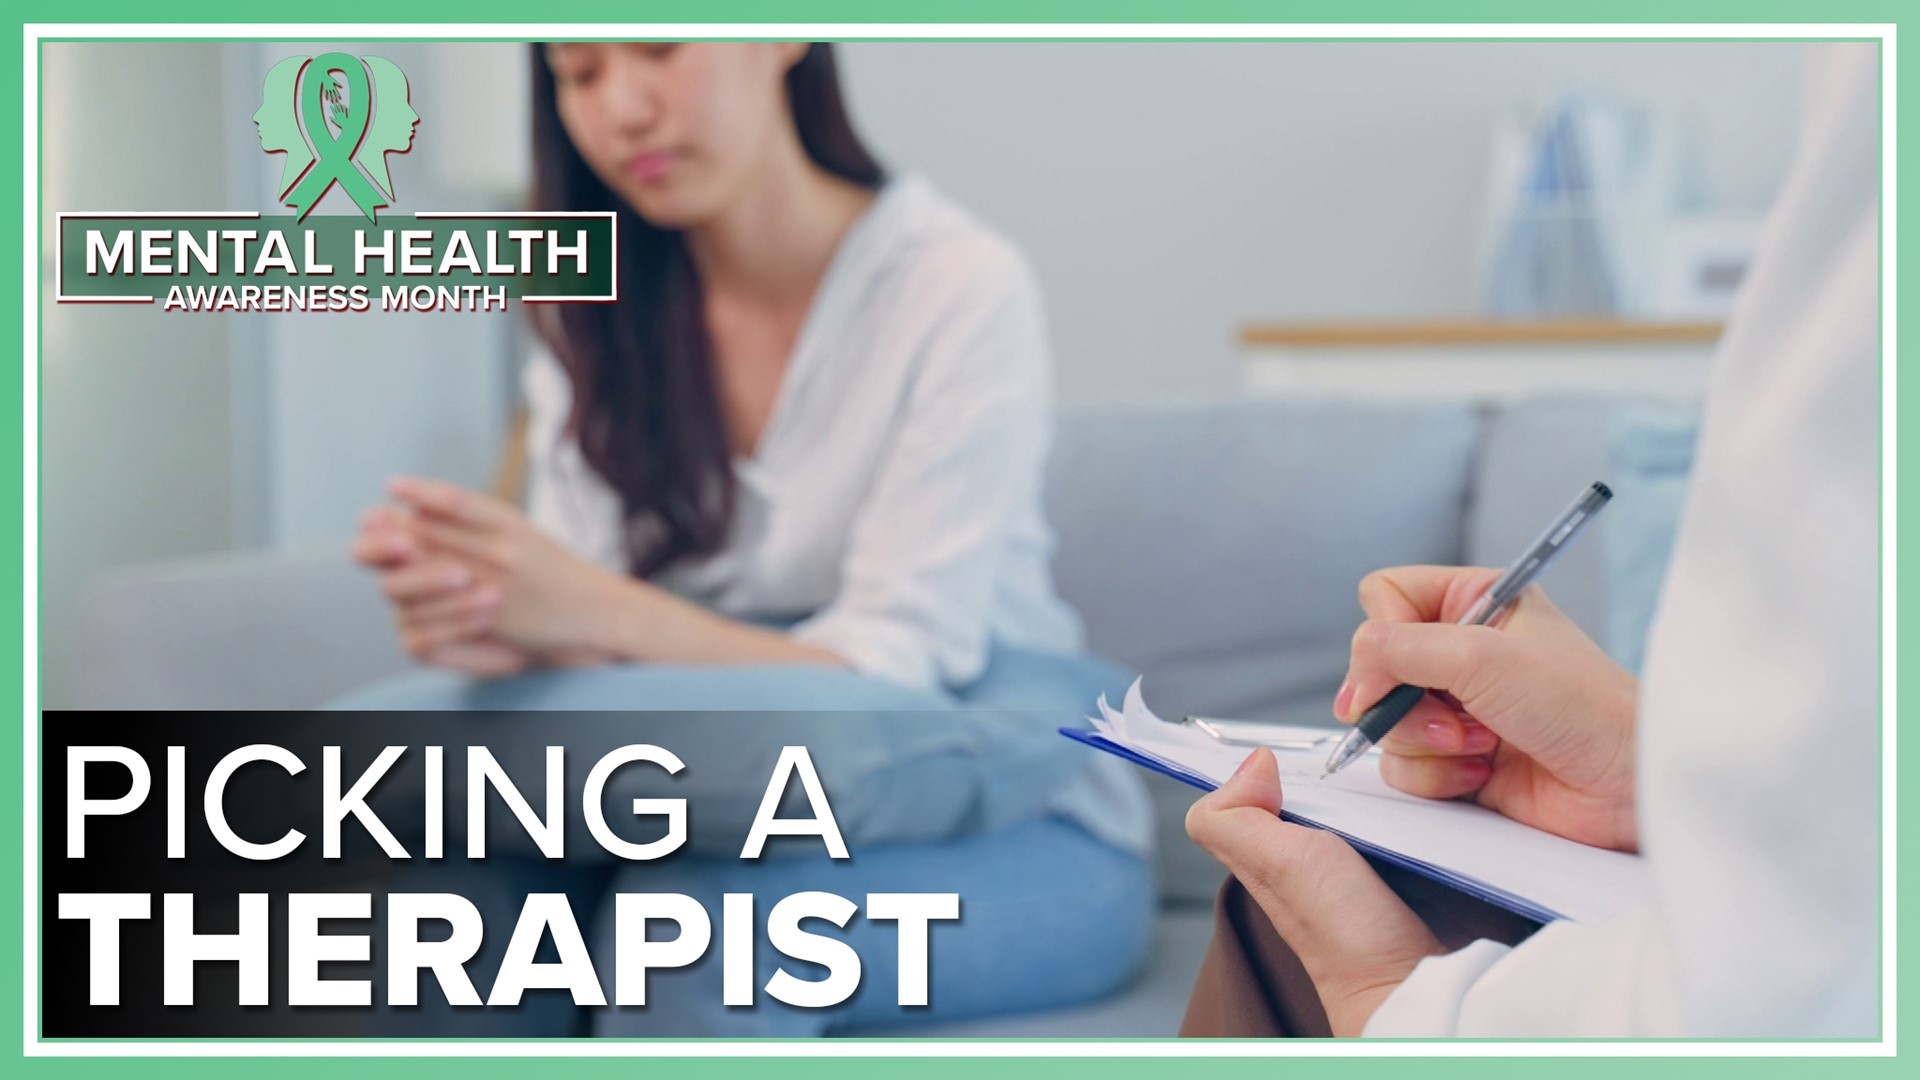 The journey to mental wellness involves having the right healthcare provider - here are some tips on picking a therapist.